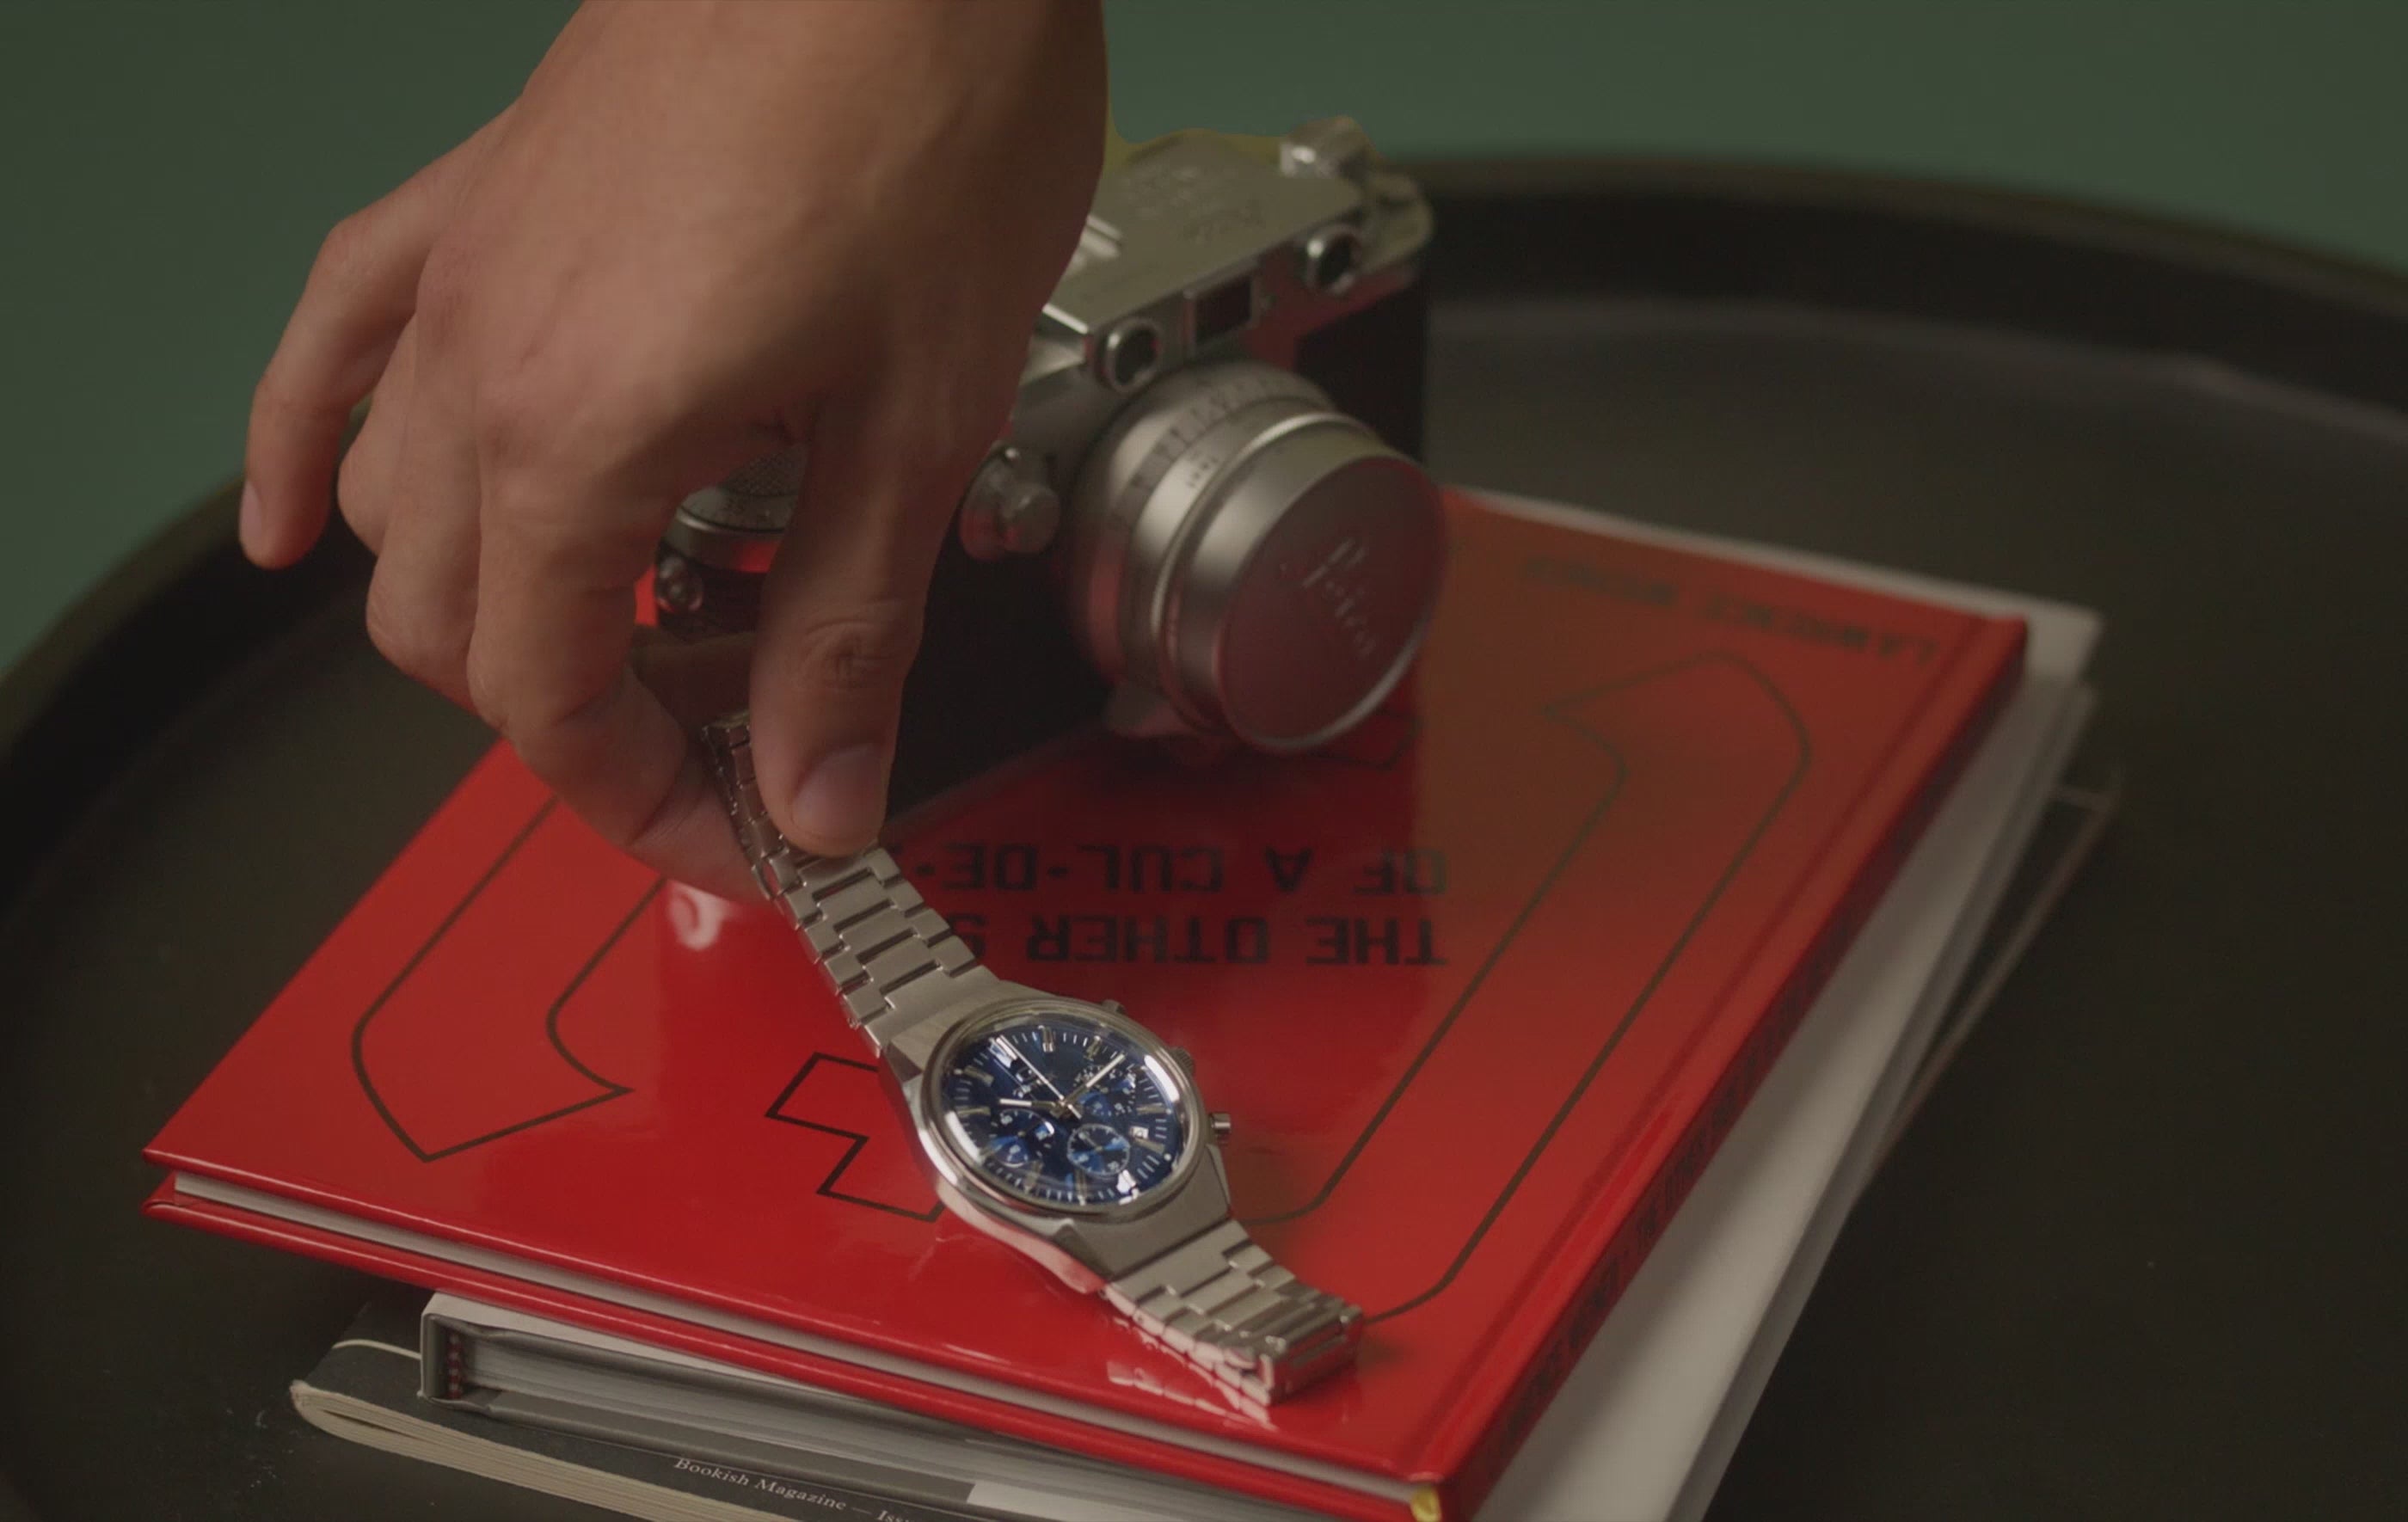 Falcon Eye Chronograph video featuring a man demonstrating putting the watch on his wrist and then laying the watch back down against a red book of Lawrence Weiner: The Other Side of A Cul-De-Sac 